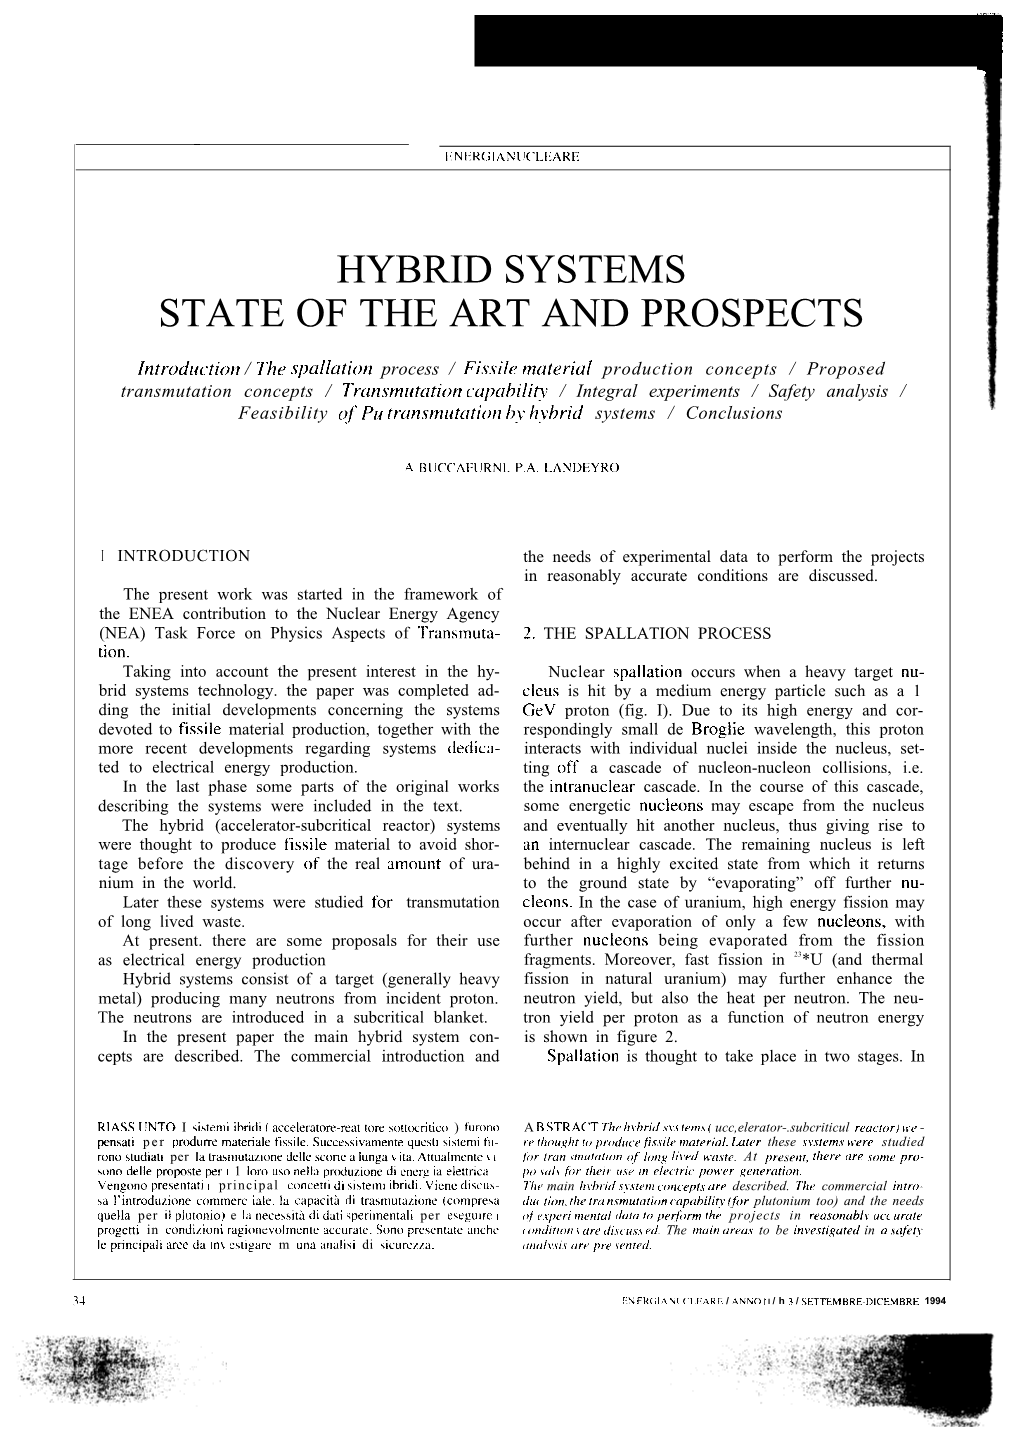 Hybrid Systems, State of the Art and Prospects